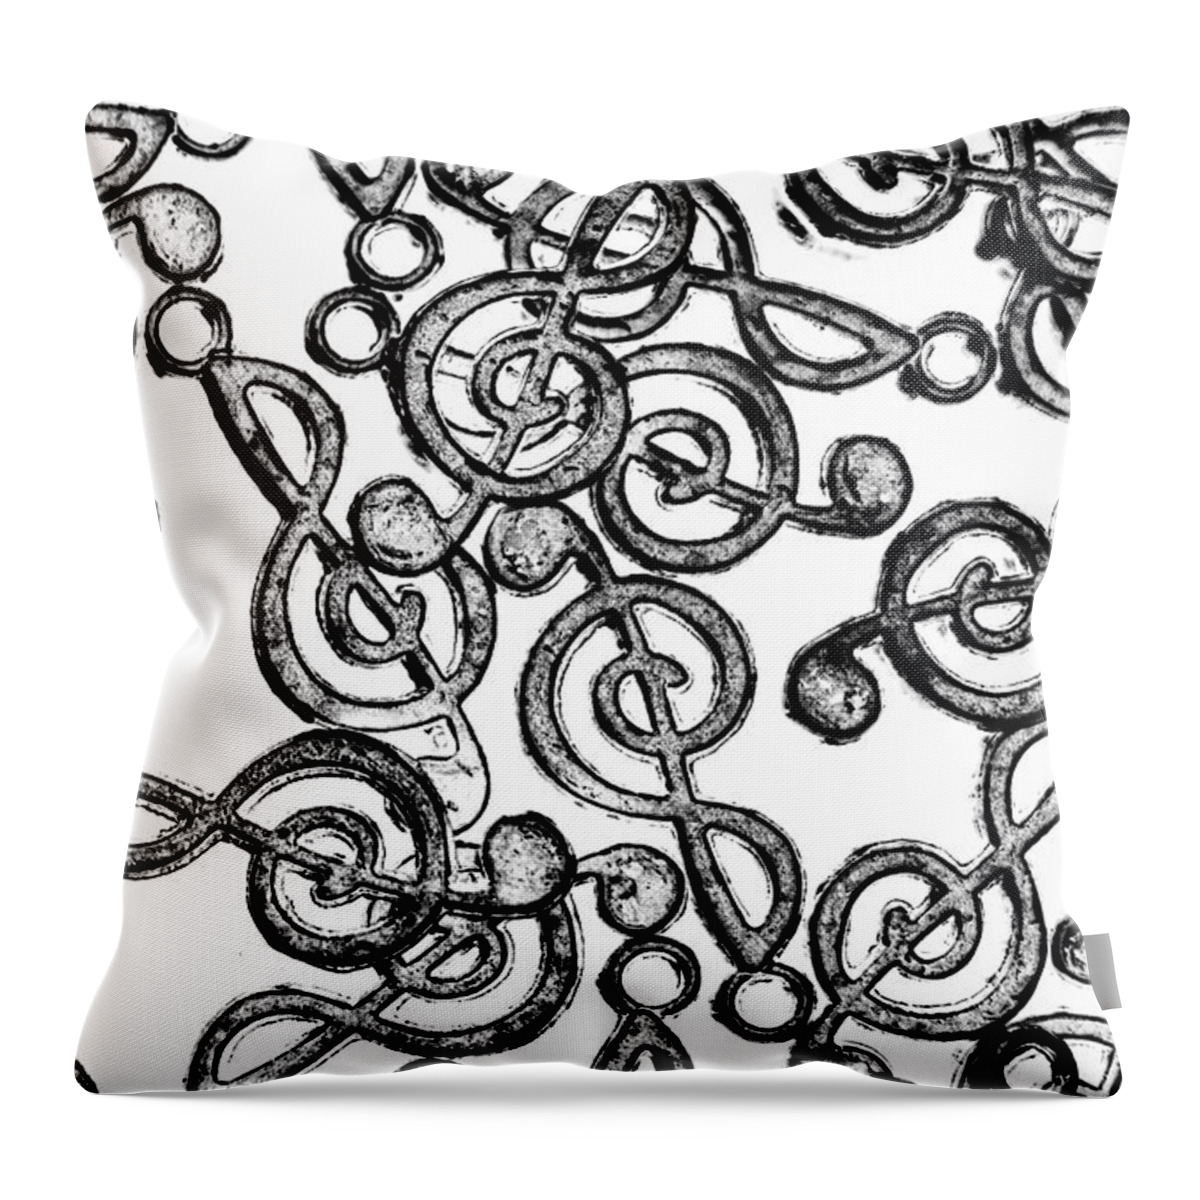 Clef Throw Pillow featuring the photograph Mishmash melodies by Jorgo Photography